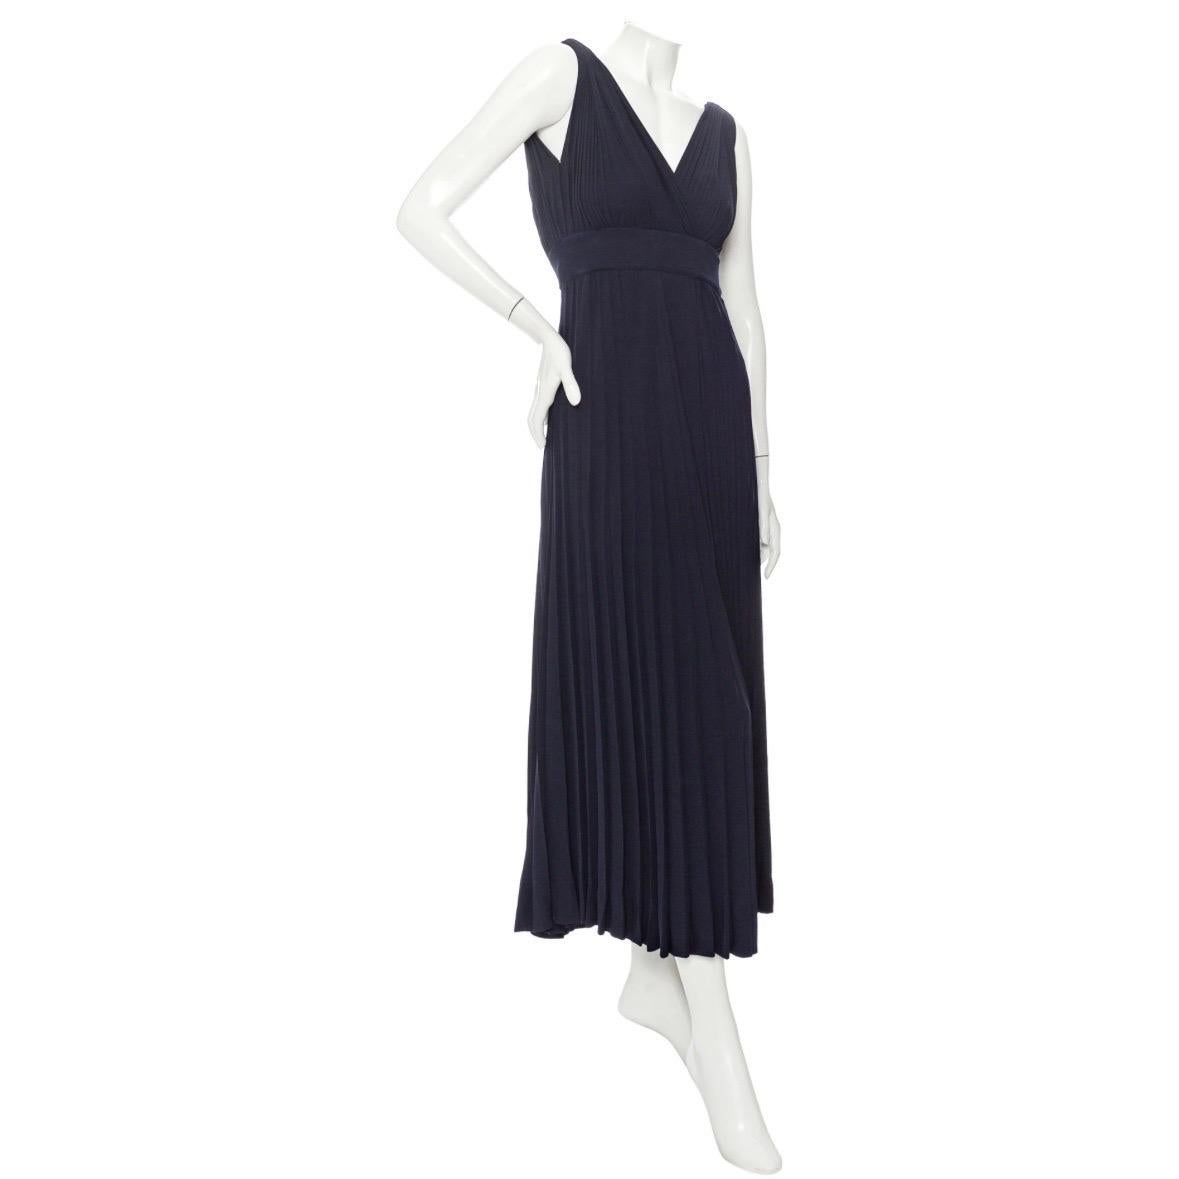 Yves Saint Laurent 1970s Navy Pleated Two-Piece Rhinestone Maxi Dress

Vintage; circa early 1970s
Haute Couture
Navy Blue
Two-Pieces; top snaps onto waistband of skirt
Pleated
Surplice v-neckline and back
Rhinestone crescents on shoulders with hook